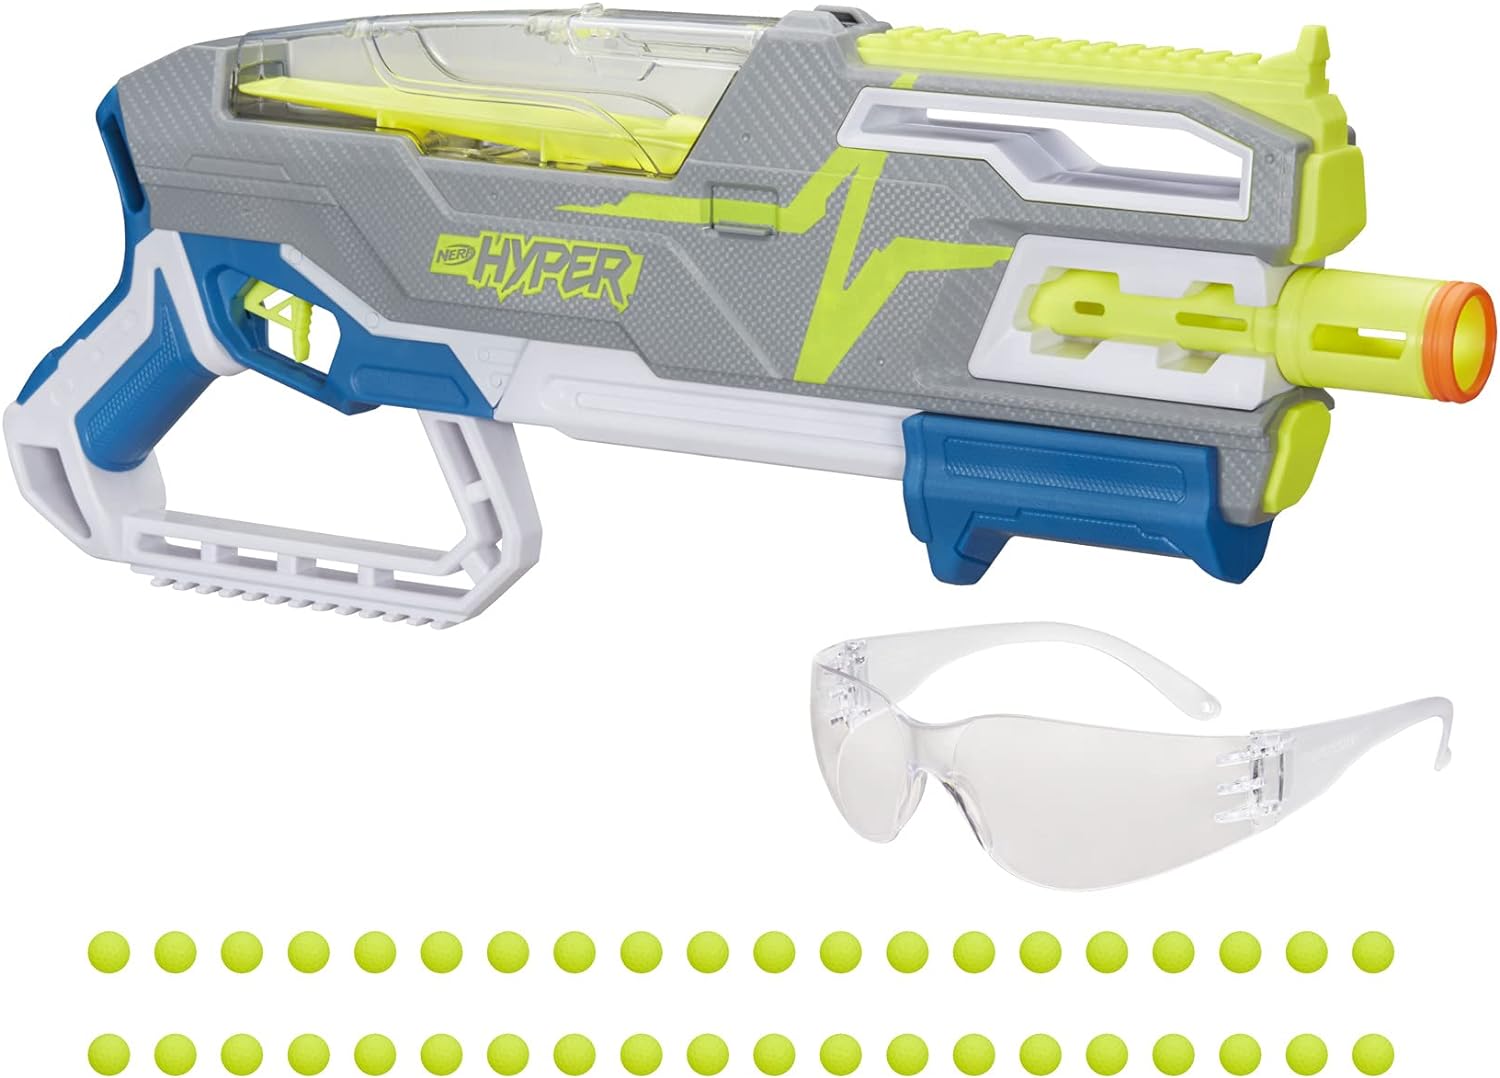 NERF Hyper Siege-50 Pump-Action Blaster, 40 Hyper Rounds, Holds Up to 50 Rounds, Glasses, Up to 110 FPS Velocity, Easy Reload, Toy Foam Blasters